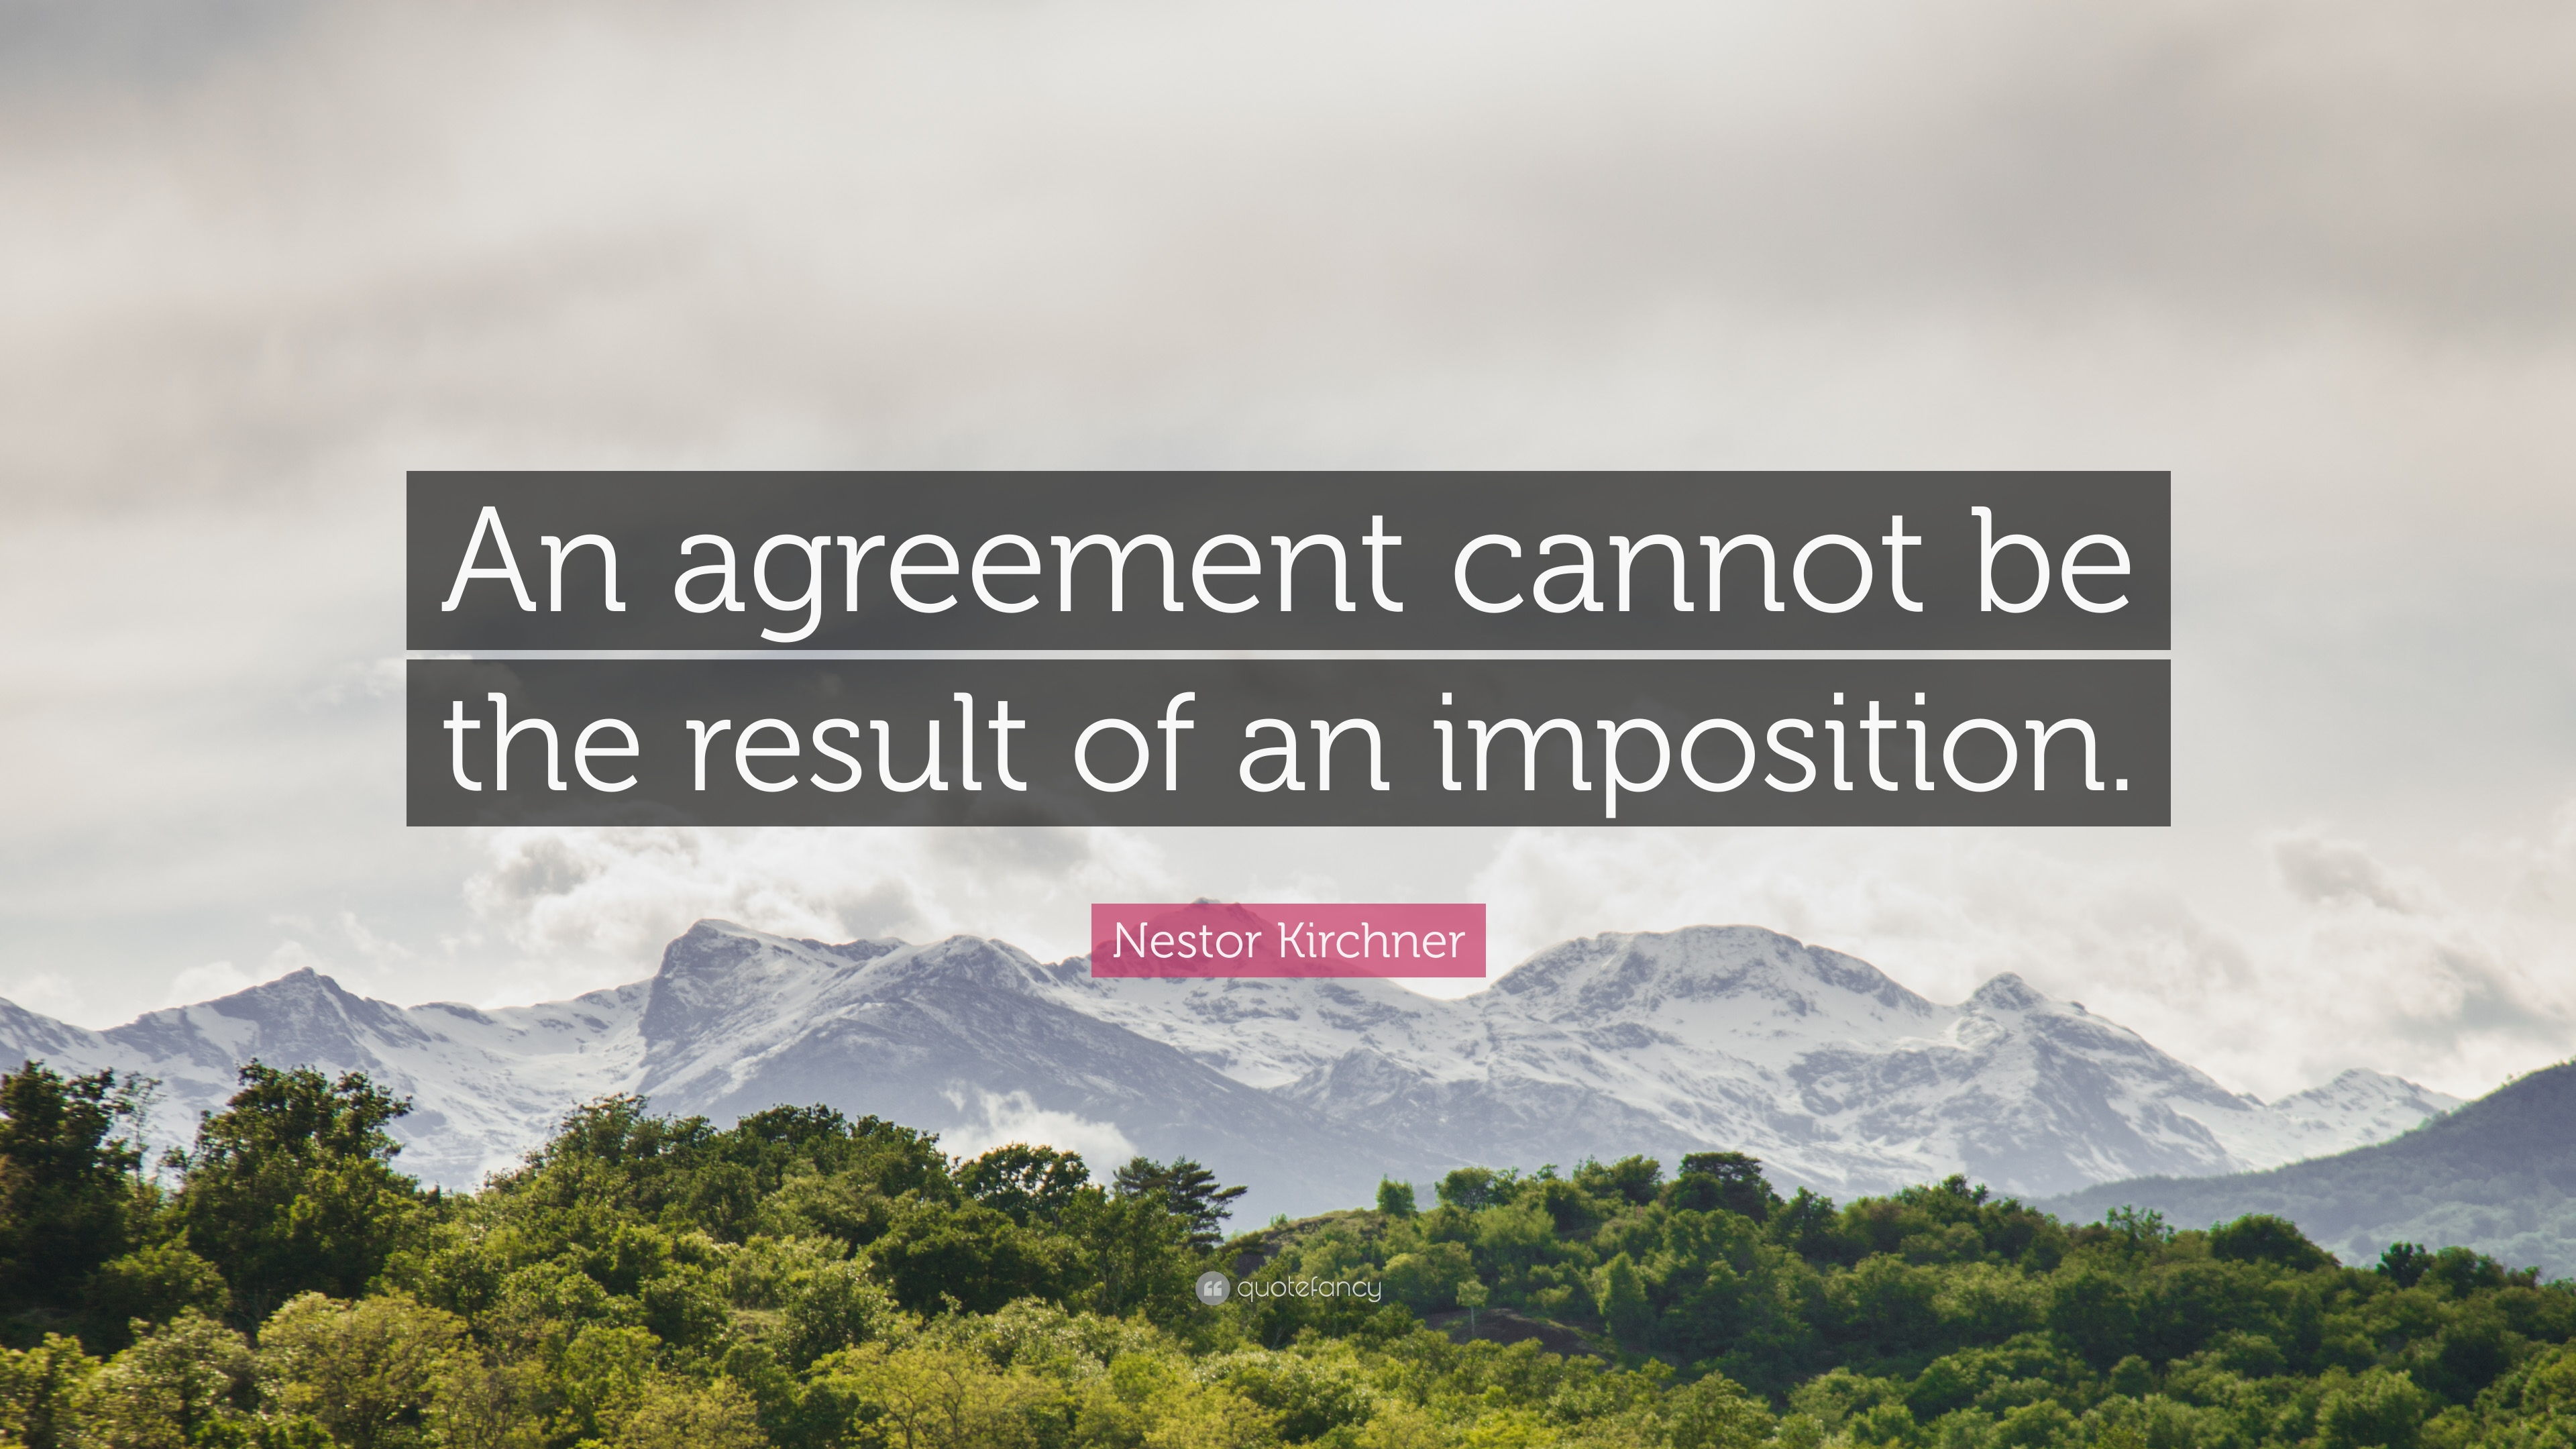 Quotes On Agreement Nestor Kirchner Quote An Agreement Cannot Be The Result Of An